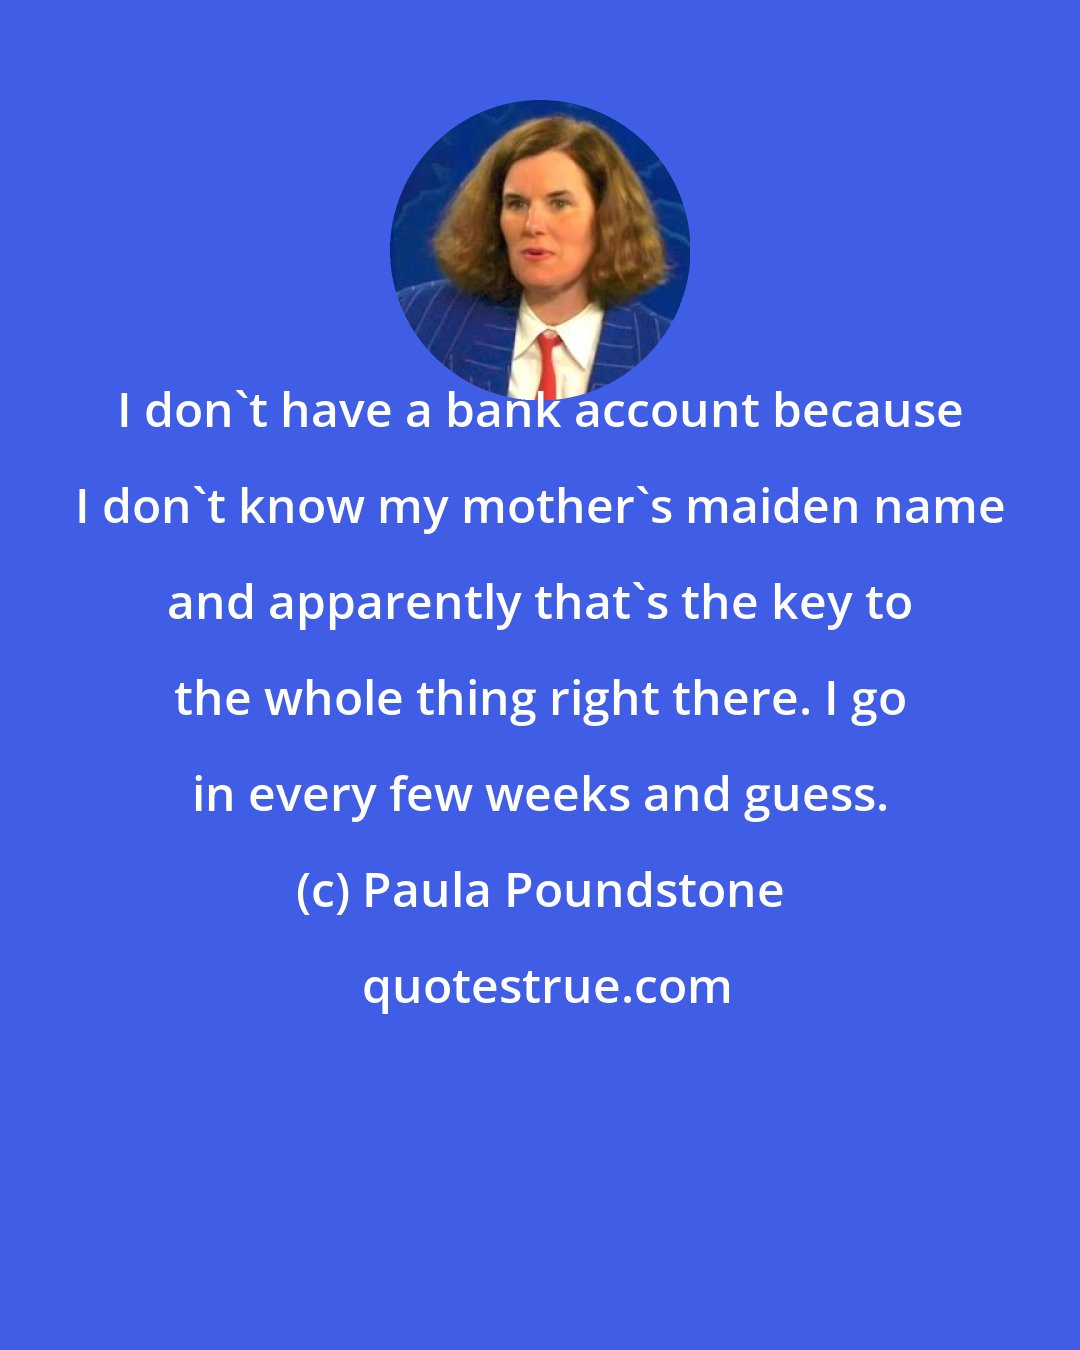 Paula Poundstone: I don't have a bank account because I don't know my mother's maiden name and apparently that's the key to the whole thing right there. I go in every few weeks and guess.